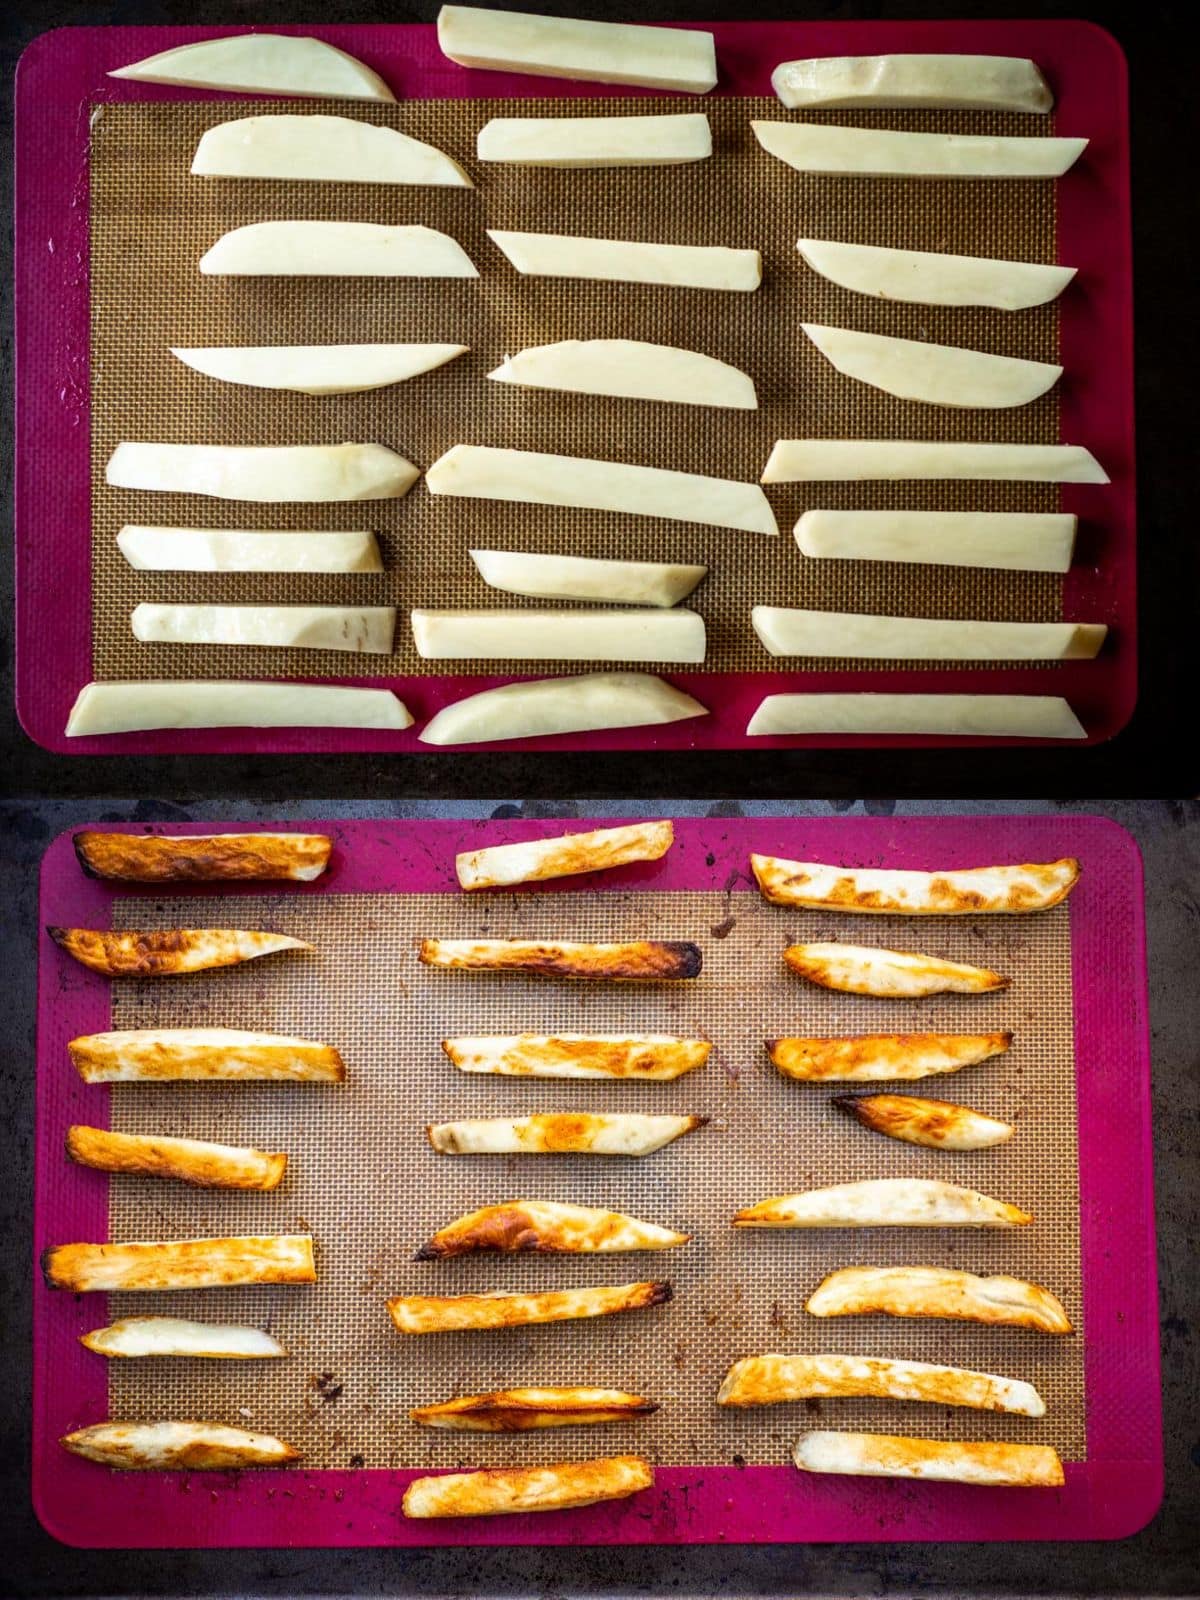 Fries positioned directly on silicone mats demonstrating alternative cooking method.